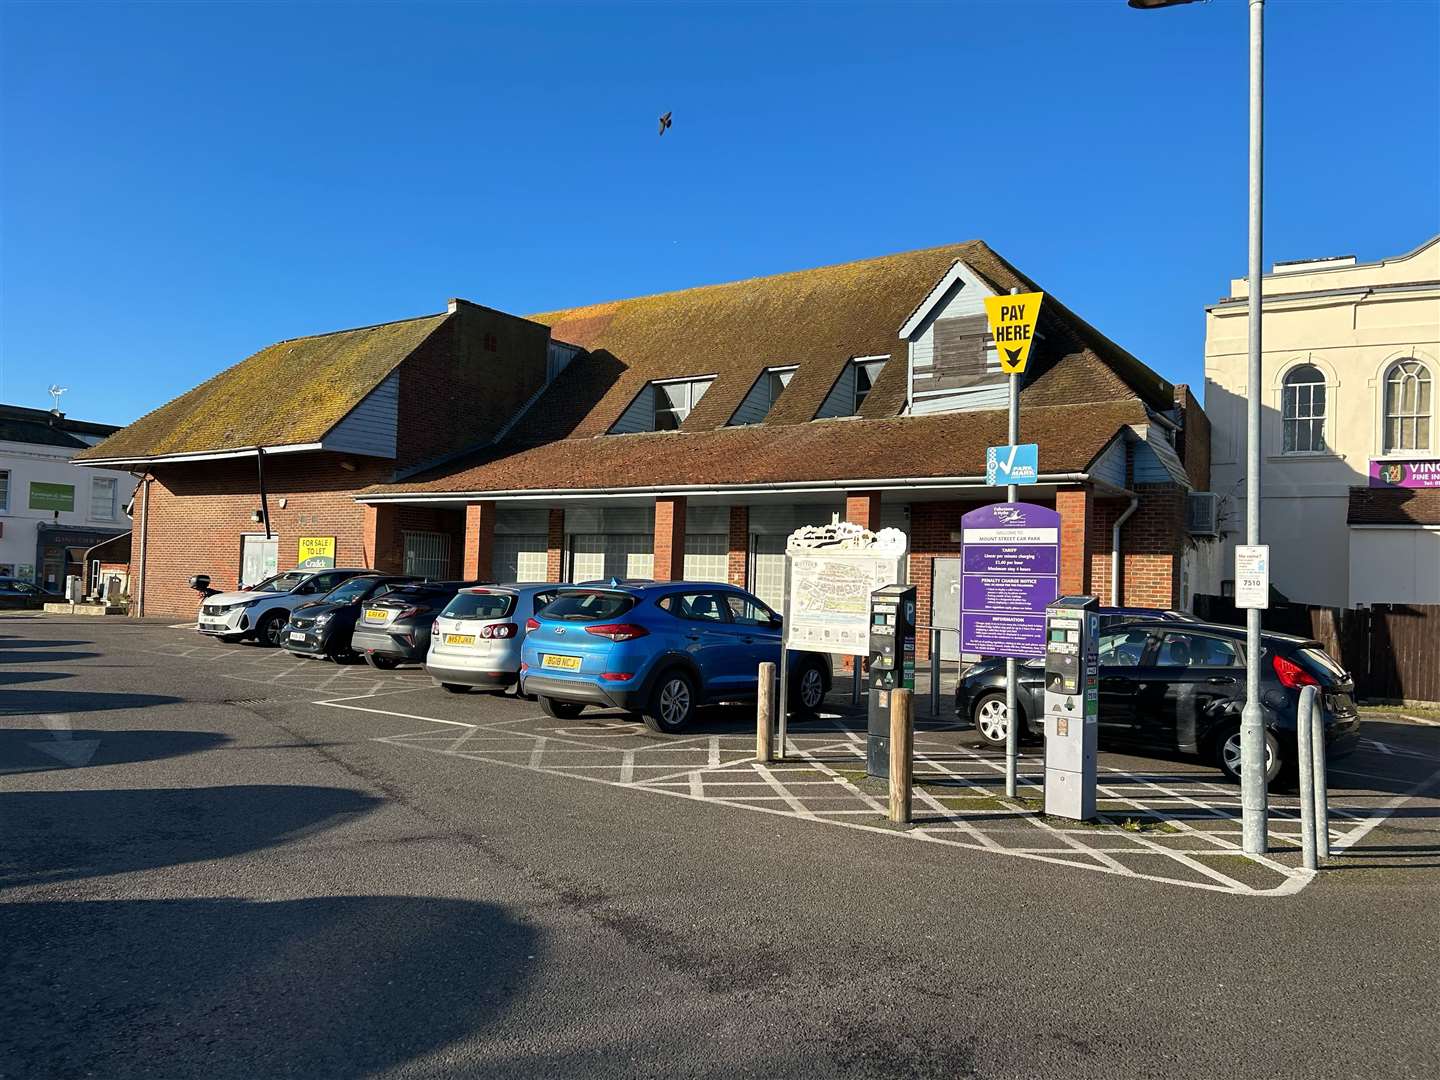 The large former Aldi building in Hythe has now been left empty for over four years